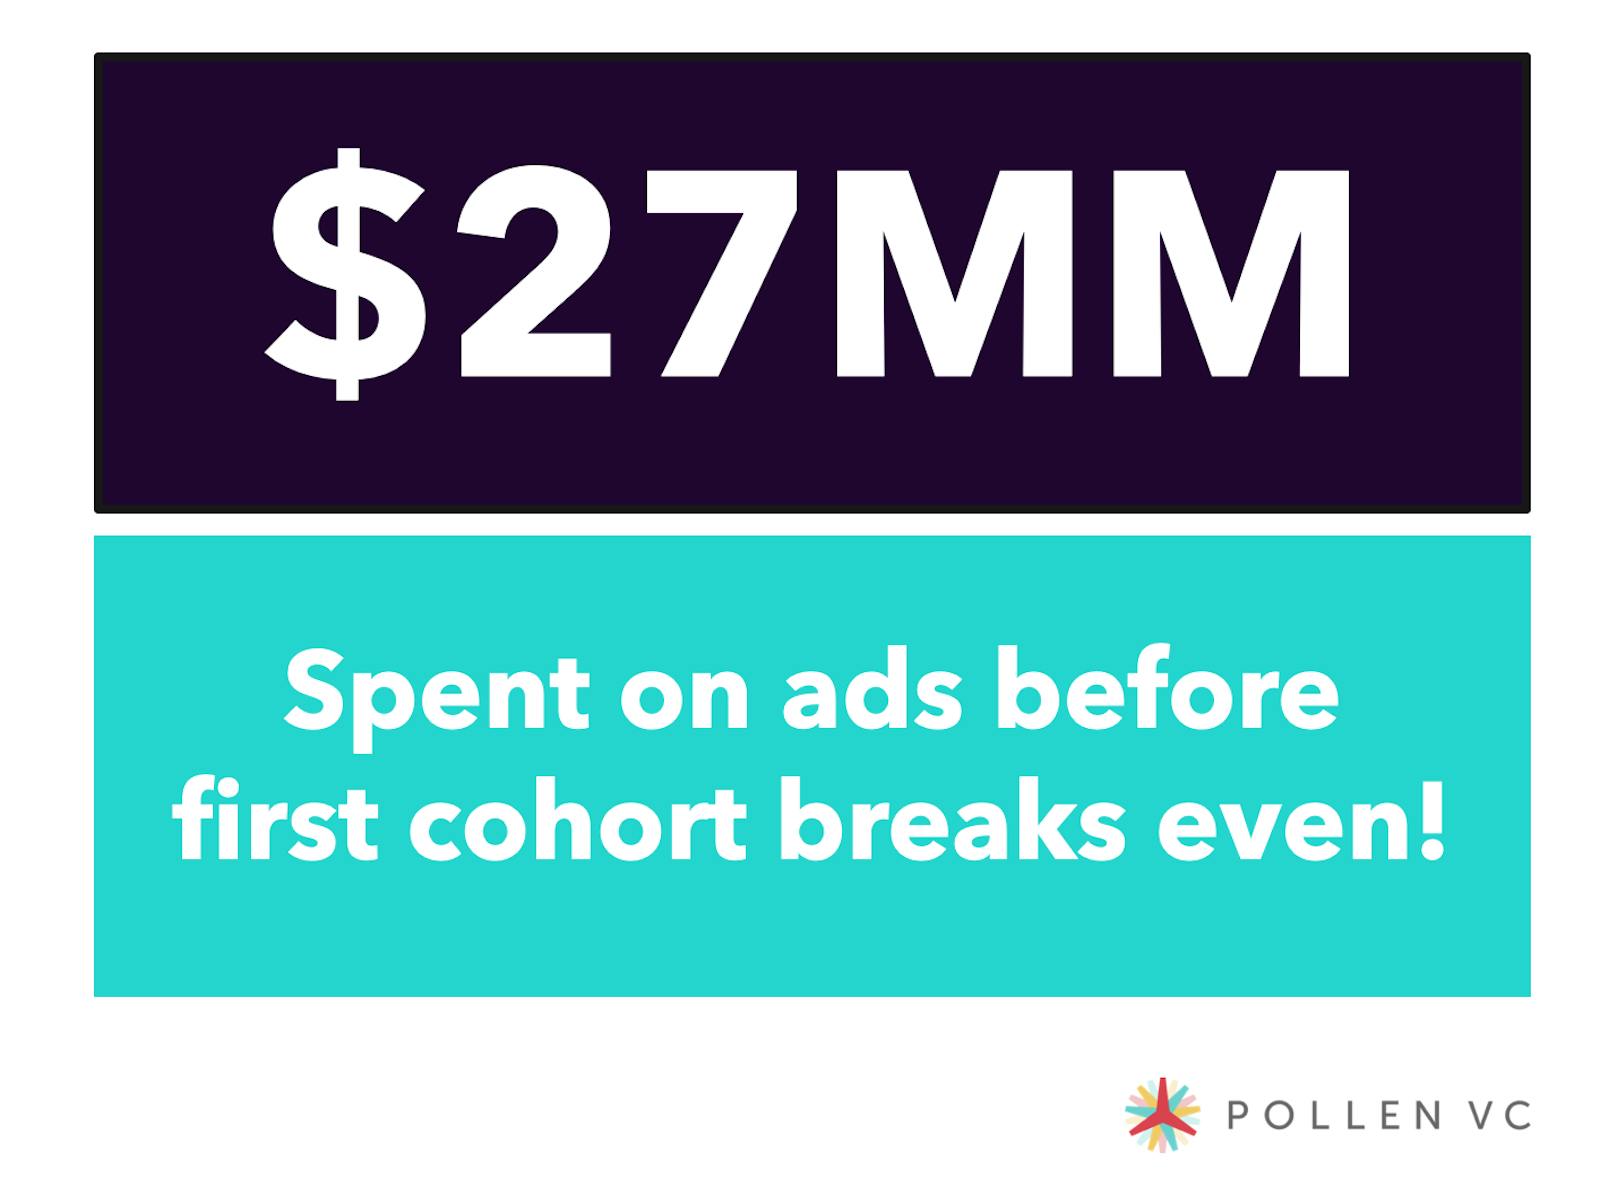 $27 MM spent on ads before fist cohort breaks even!